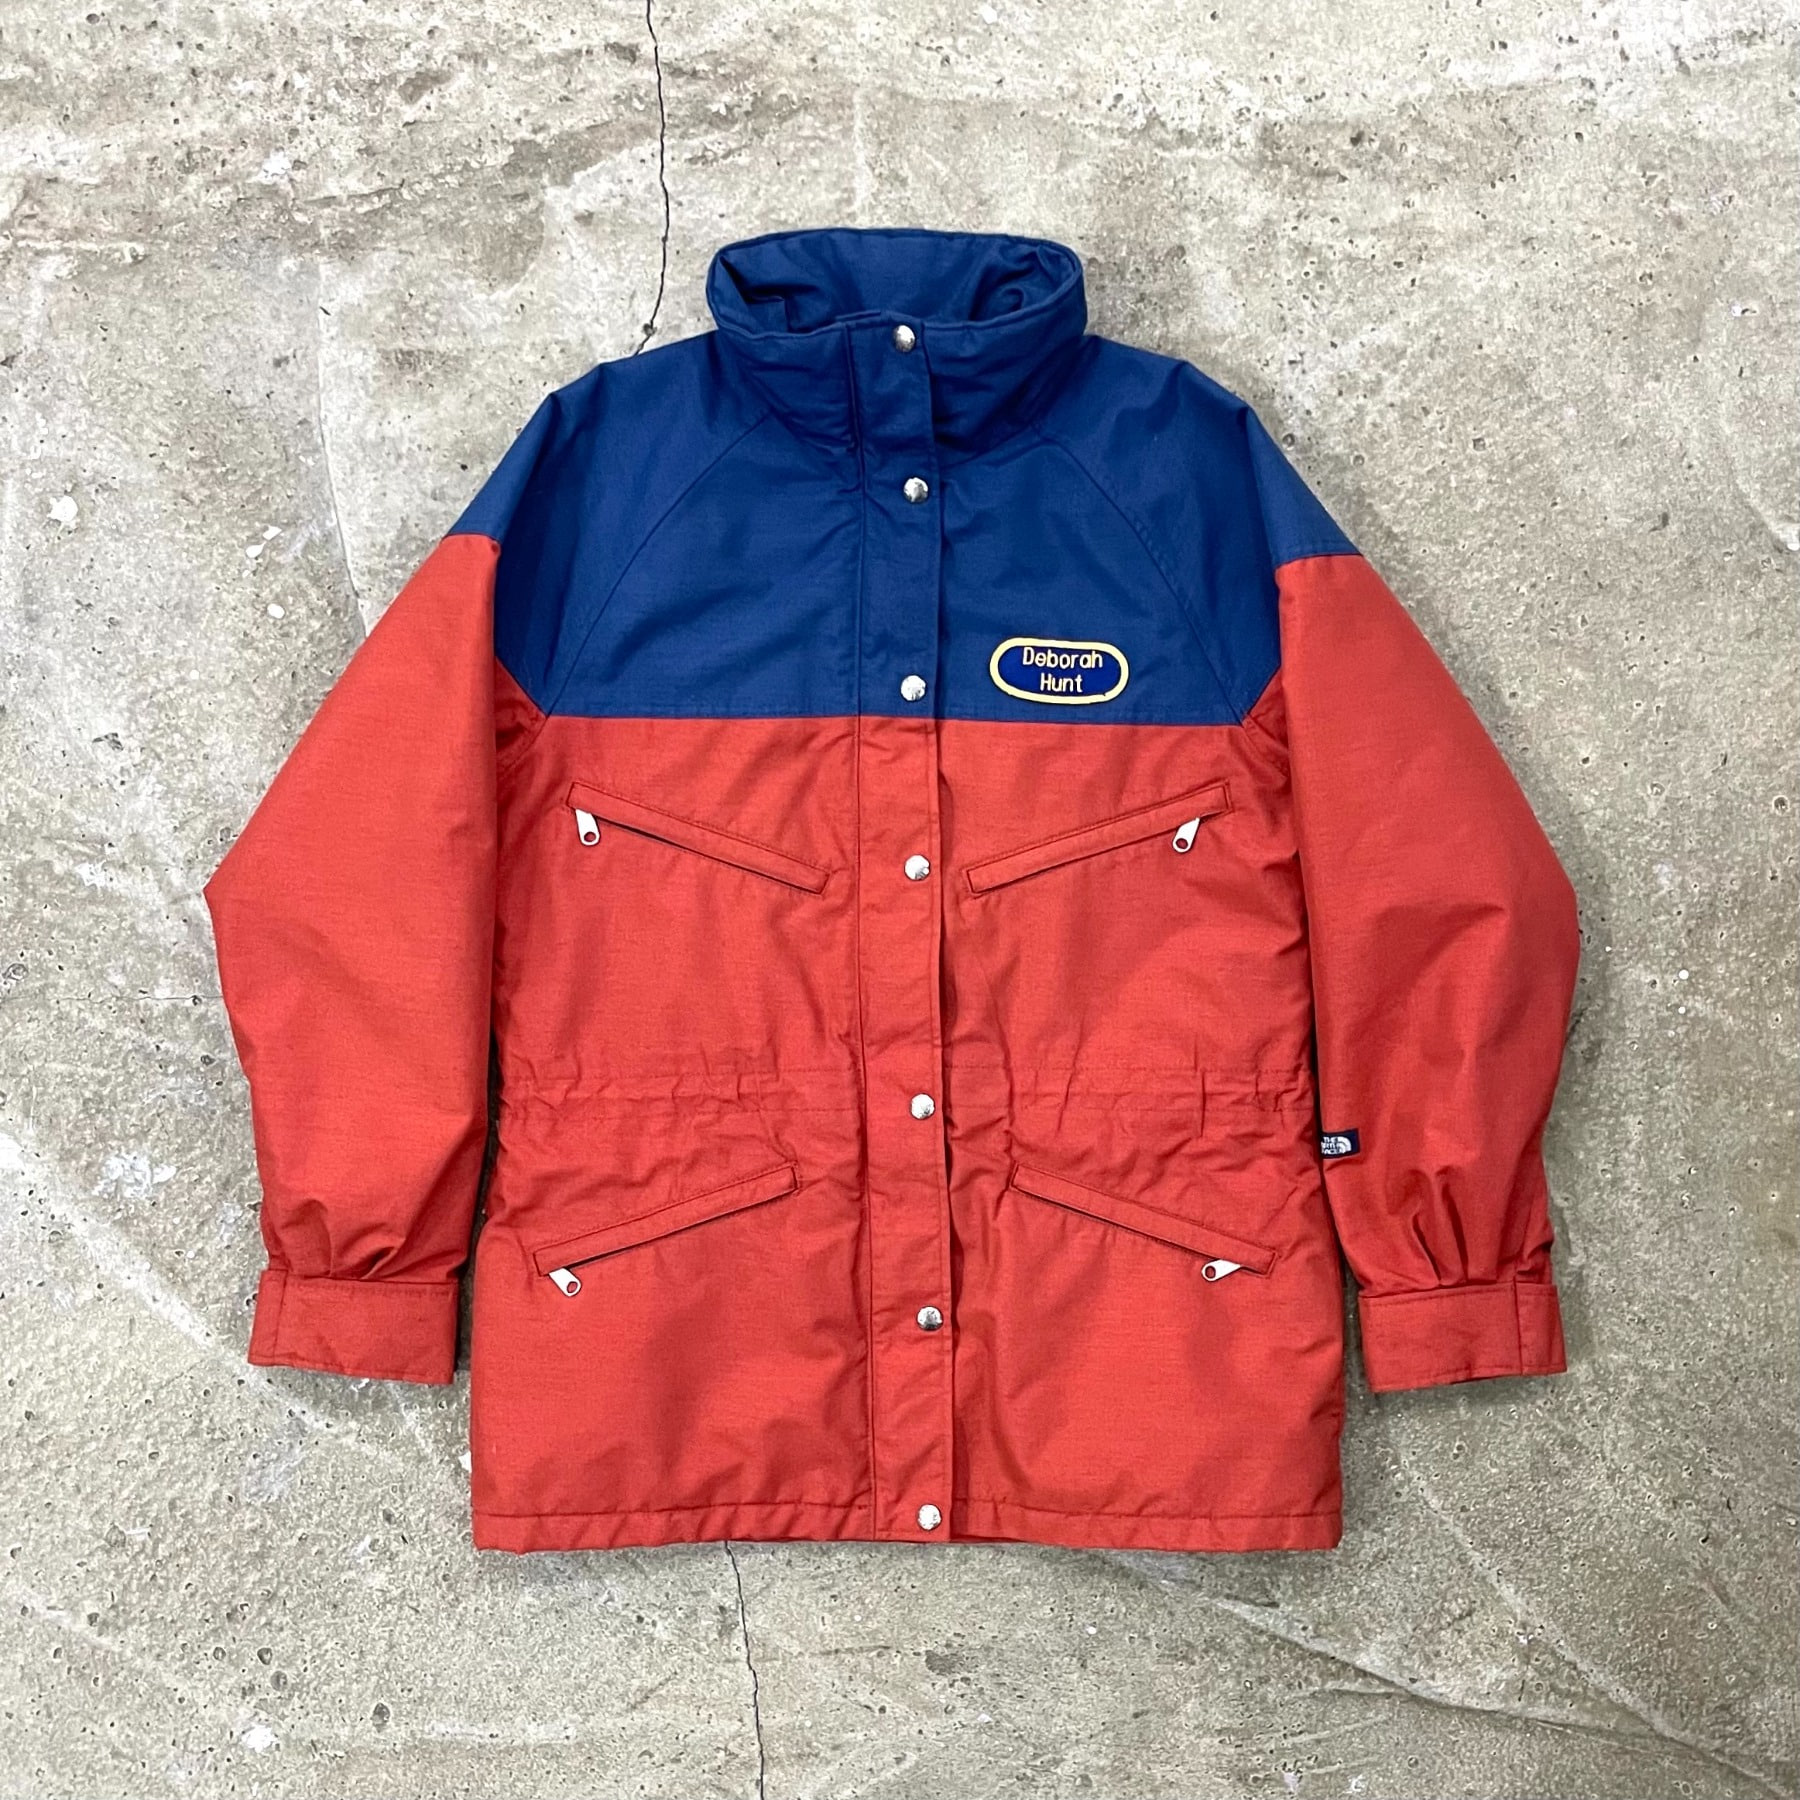 1986 The North Face Gore-Tex Jacket (Made in USA)